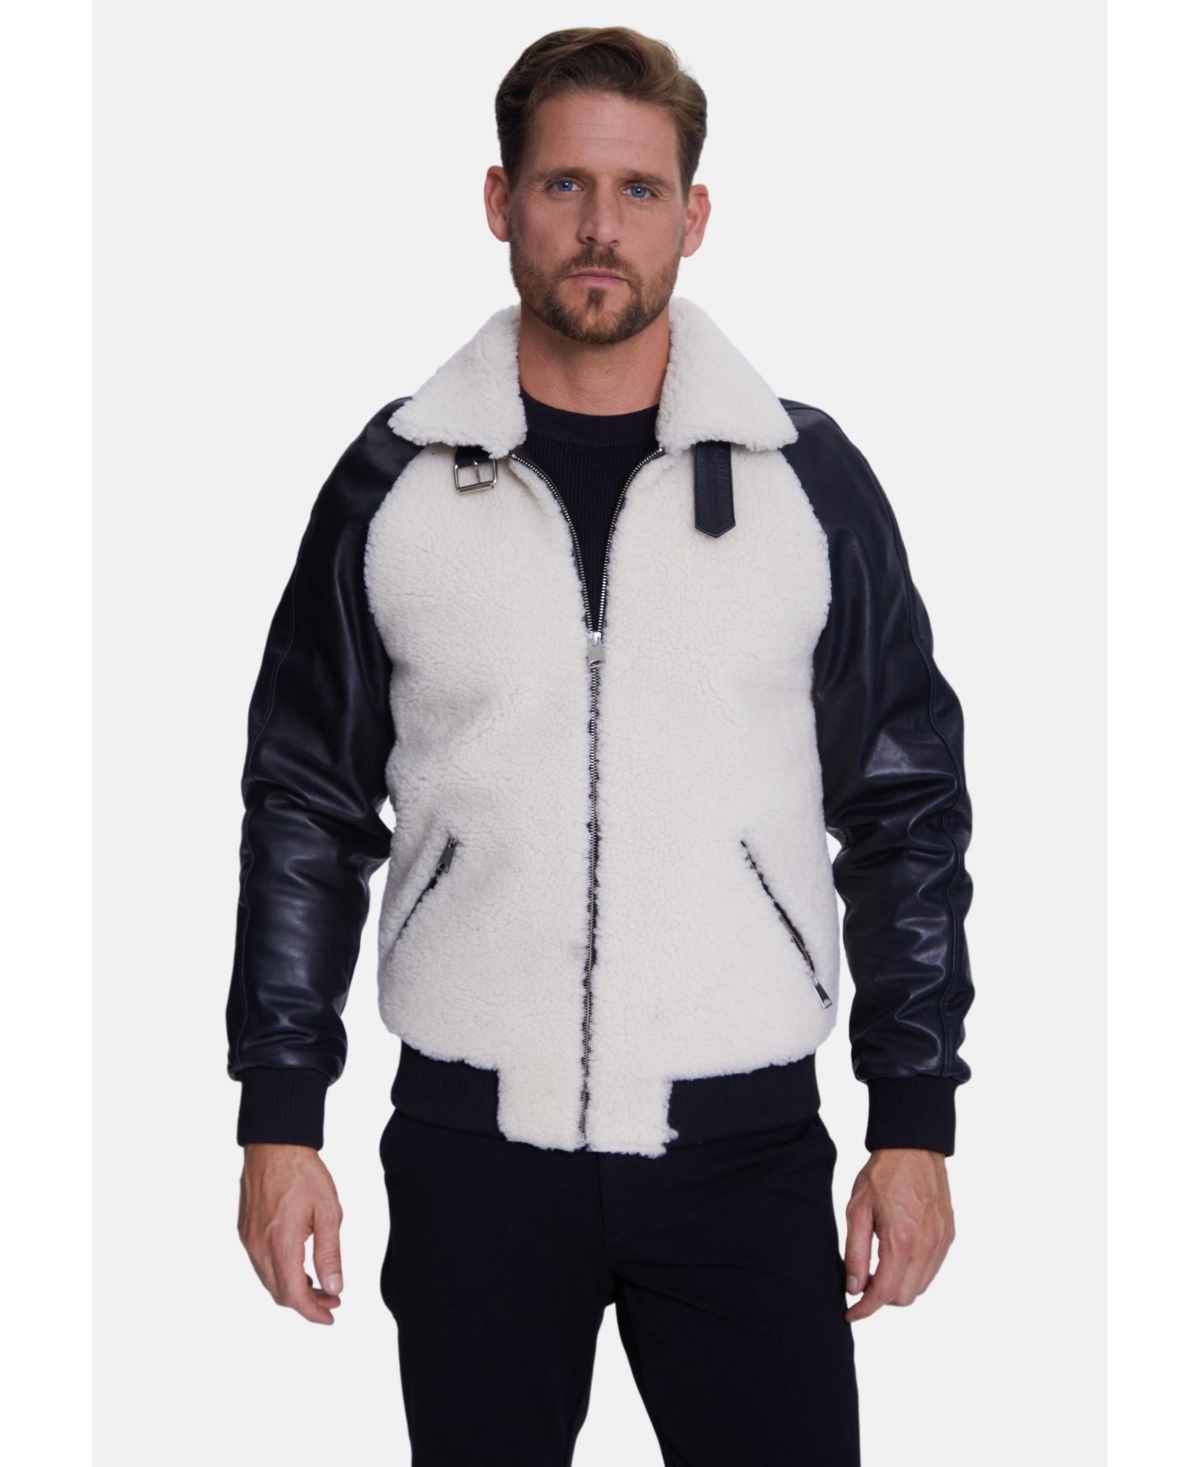 Men's Shearling Jacket, Silky Black With White Curly Wool - Black